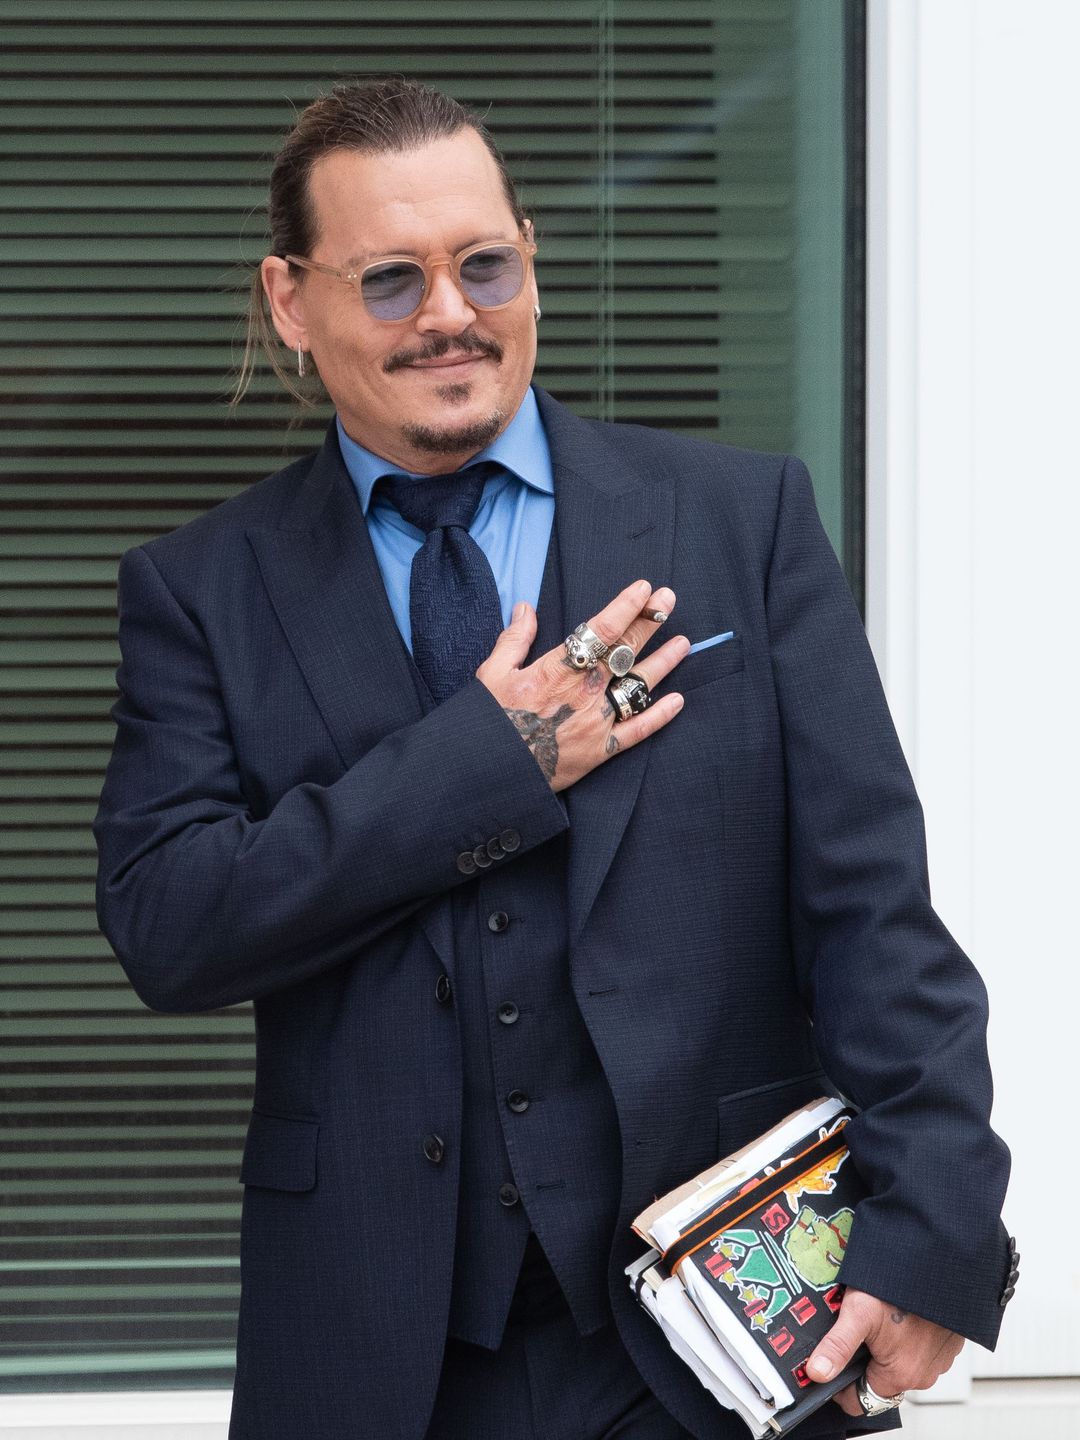 Johnny Depp looking over to the right, he is carrying some papers and wearing sunglasses